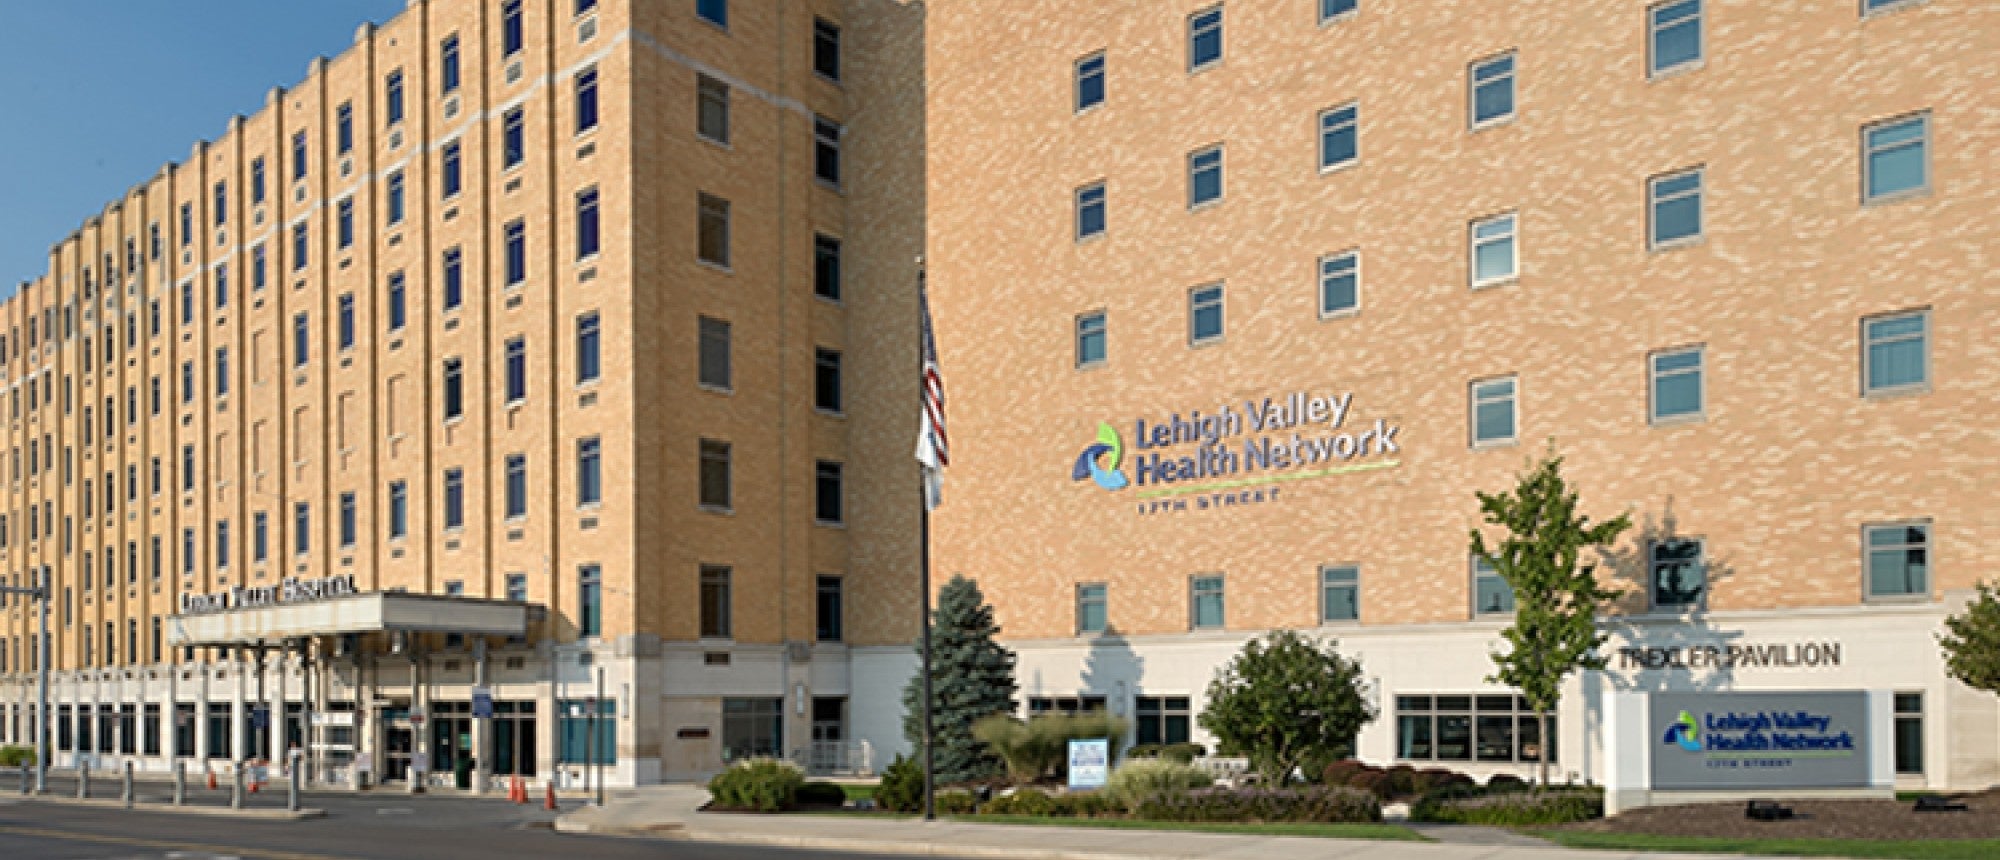 Breast Health Services at Lehigh Valley Hospital–17th Street